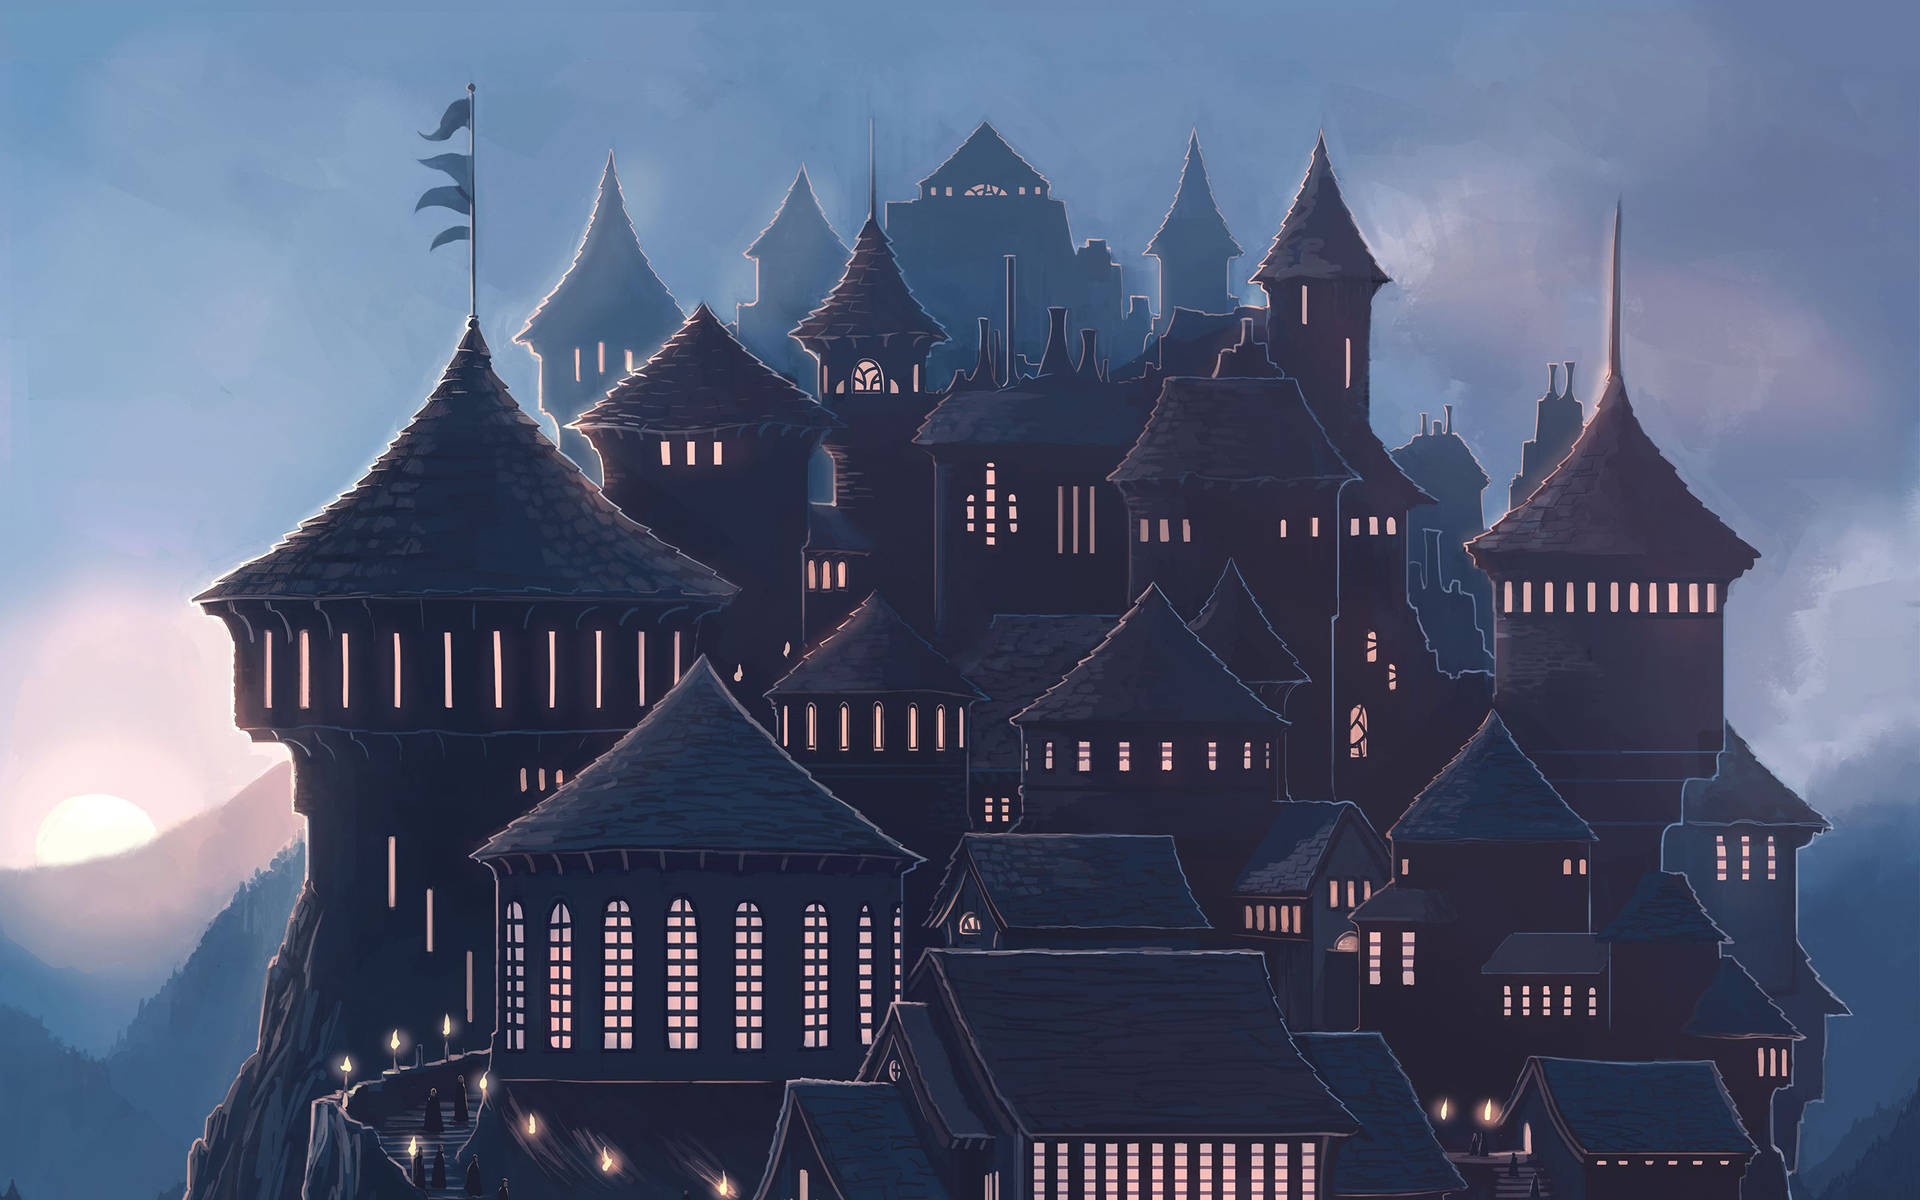 Hogwarts Castle situated on a hill with a full moon in the night sky Wallpaper